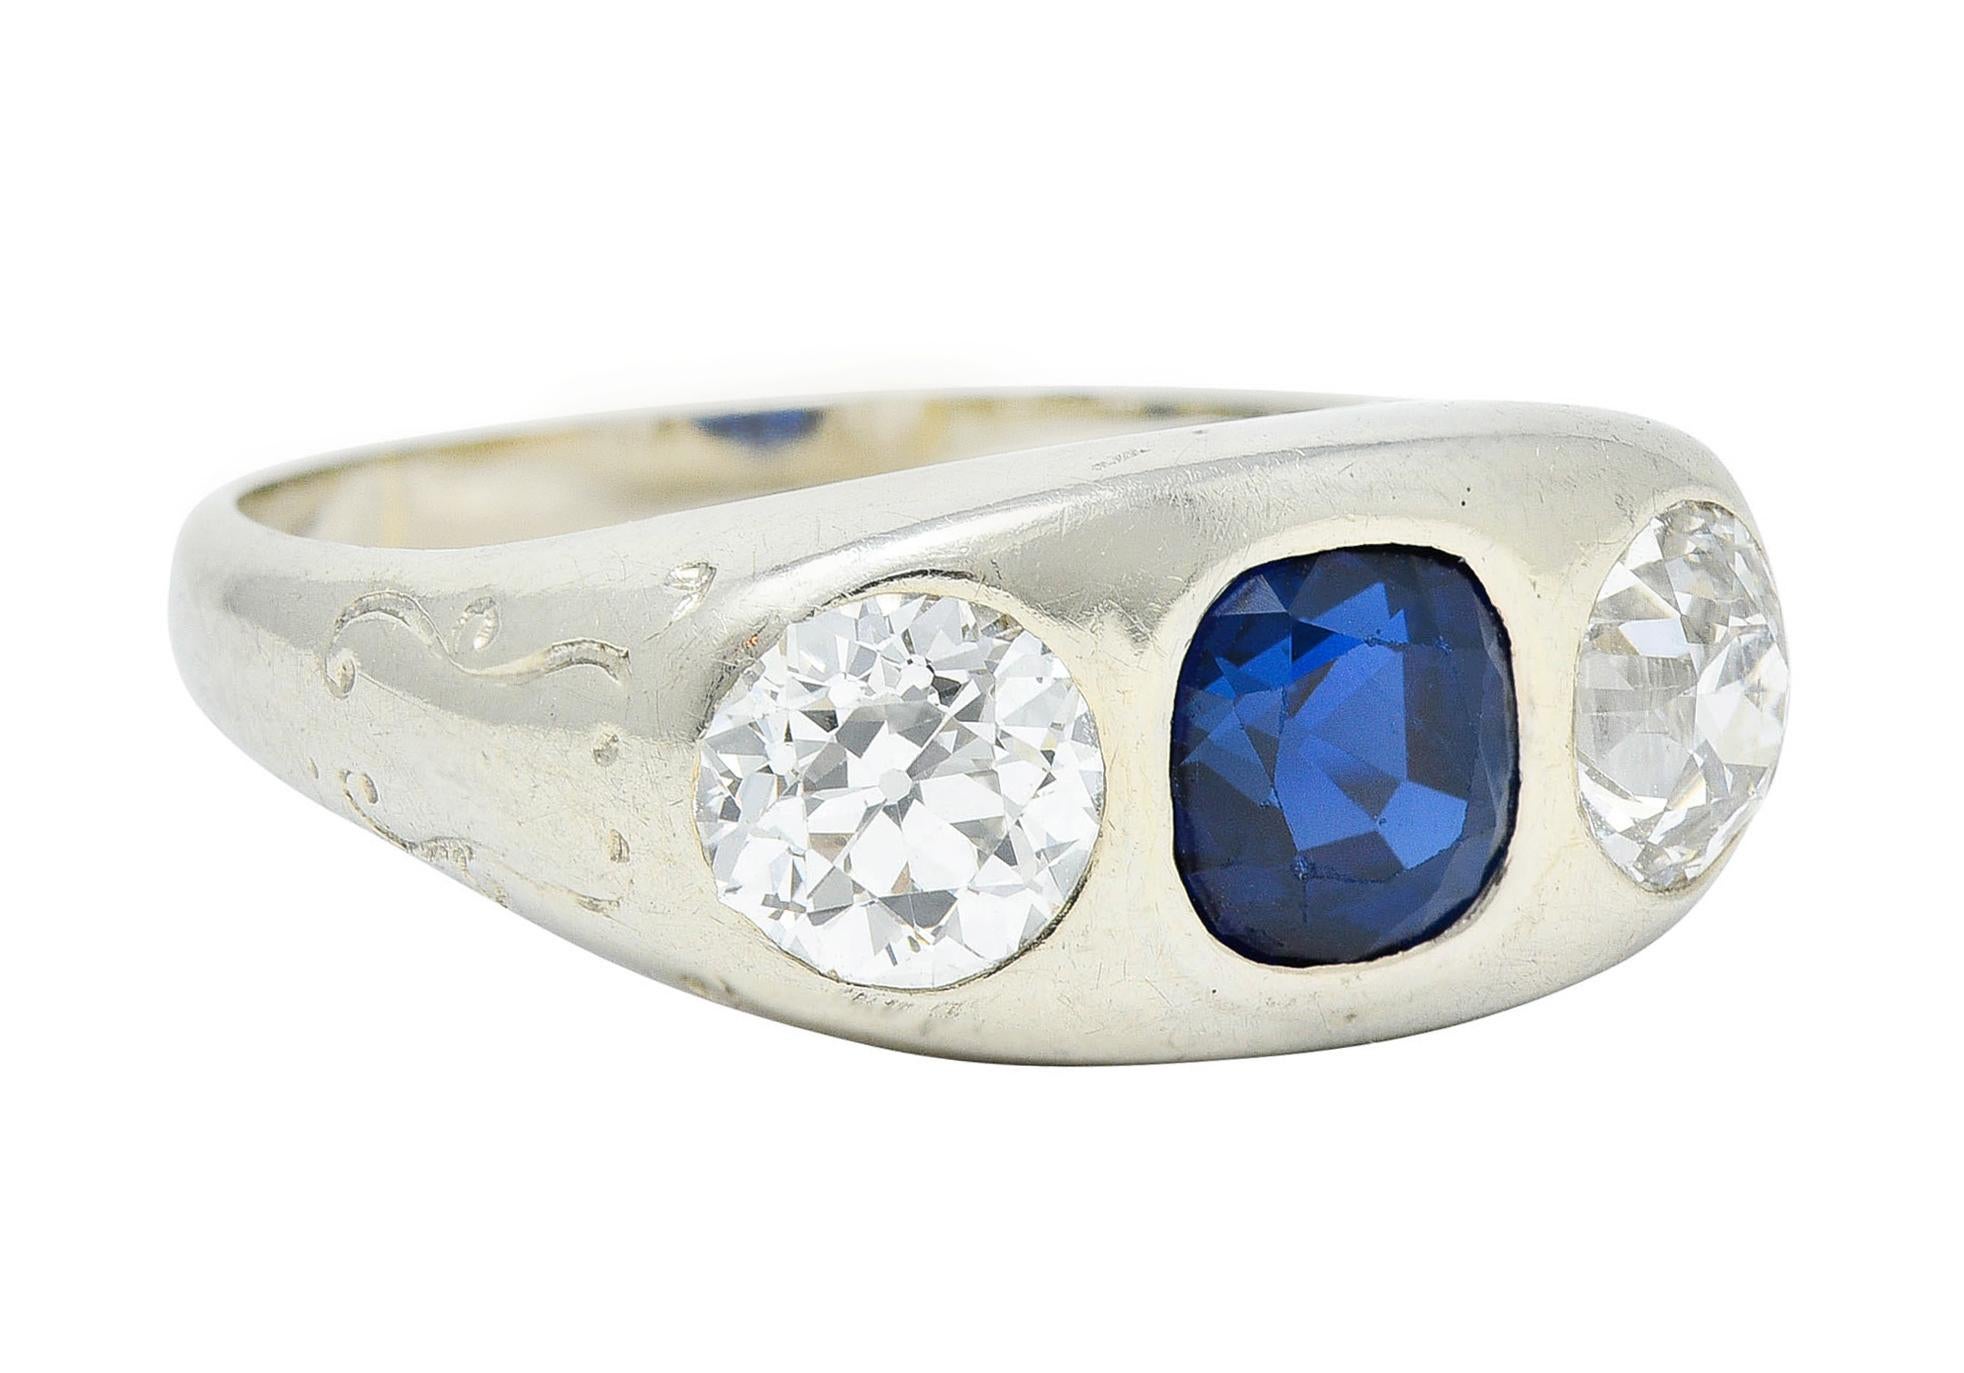 Gypsy style ring centers a cushion cut Cambodian sapphire

Weighing approximately 1.40 carats - medium dark royal blue with no indications of heat

Flanked by two flush set old European cut diamonds

Weighing in total approximately 1.65 carats with